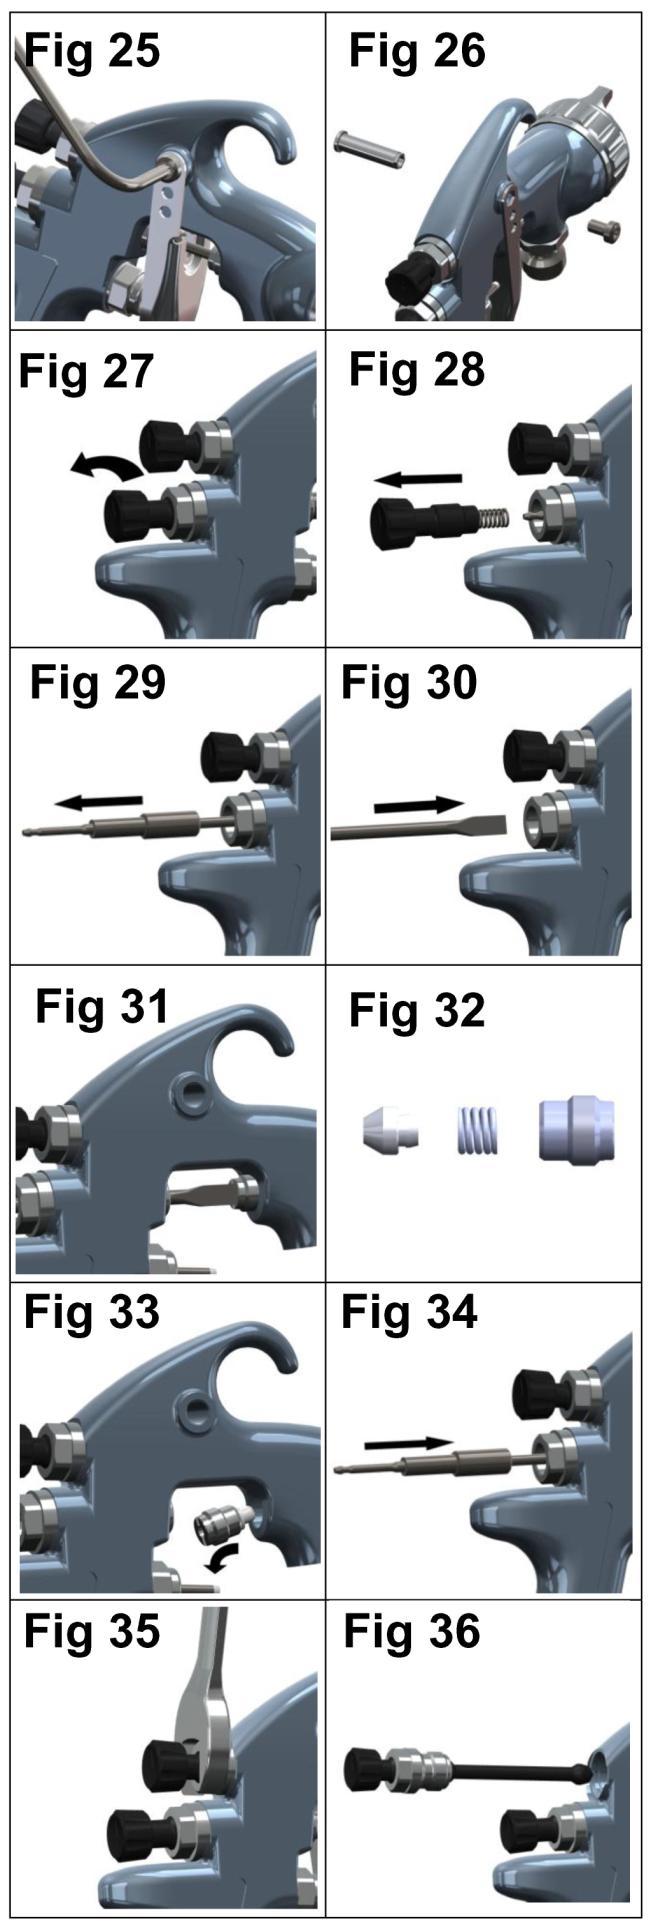 Parts Replacement/Maintenance NEEDLE PACKING REPLACEMENT INSTRUCTIONS 13. Remove trigger using key (47) or TORX (T20) driver. (See figs 25 & 26) 14.